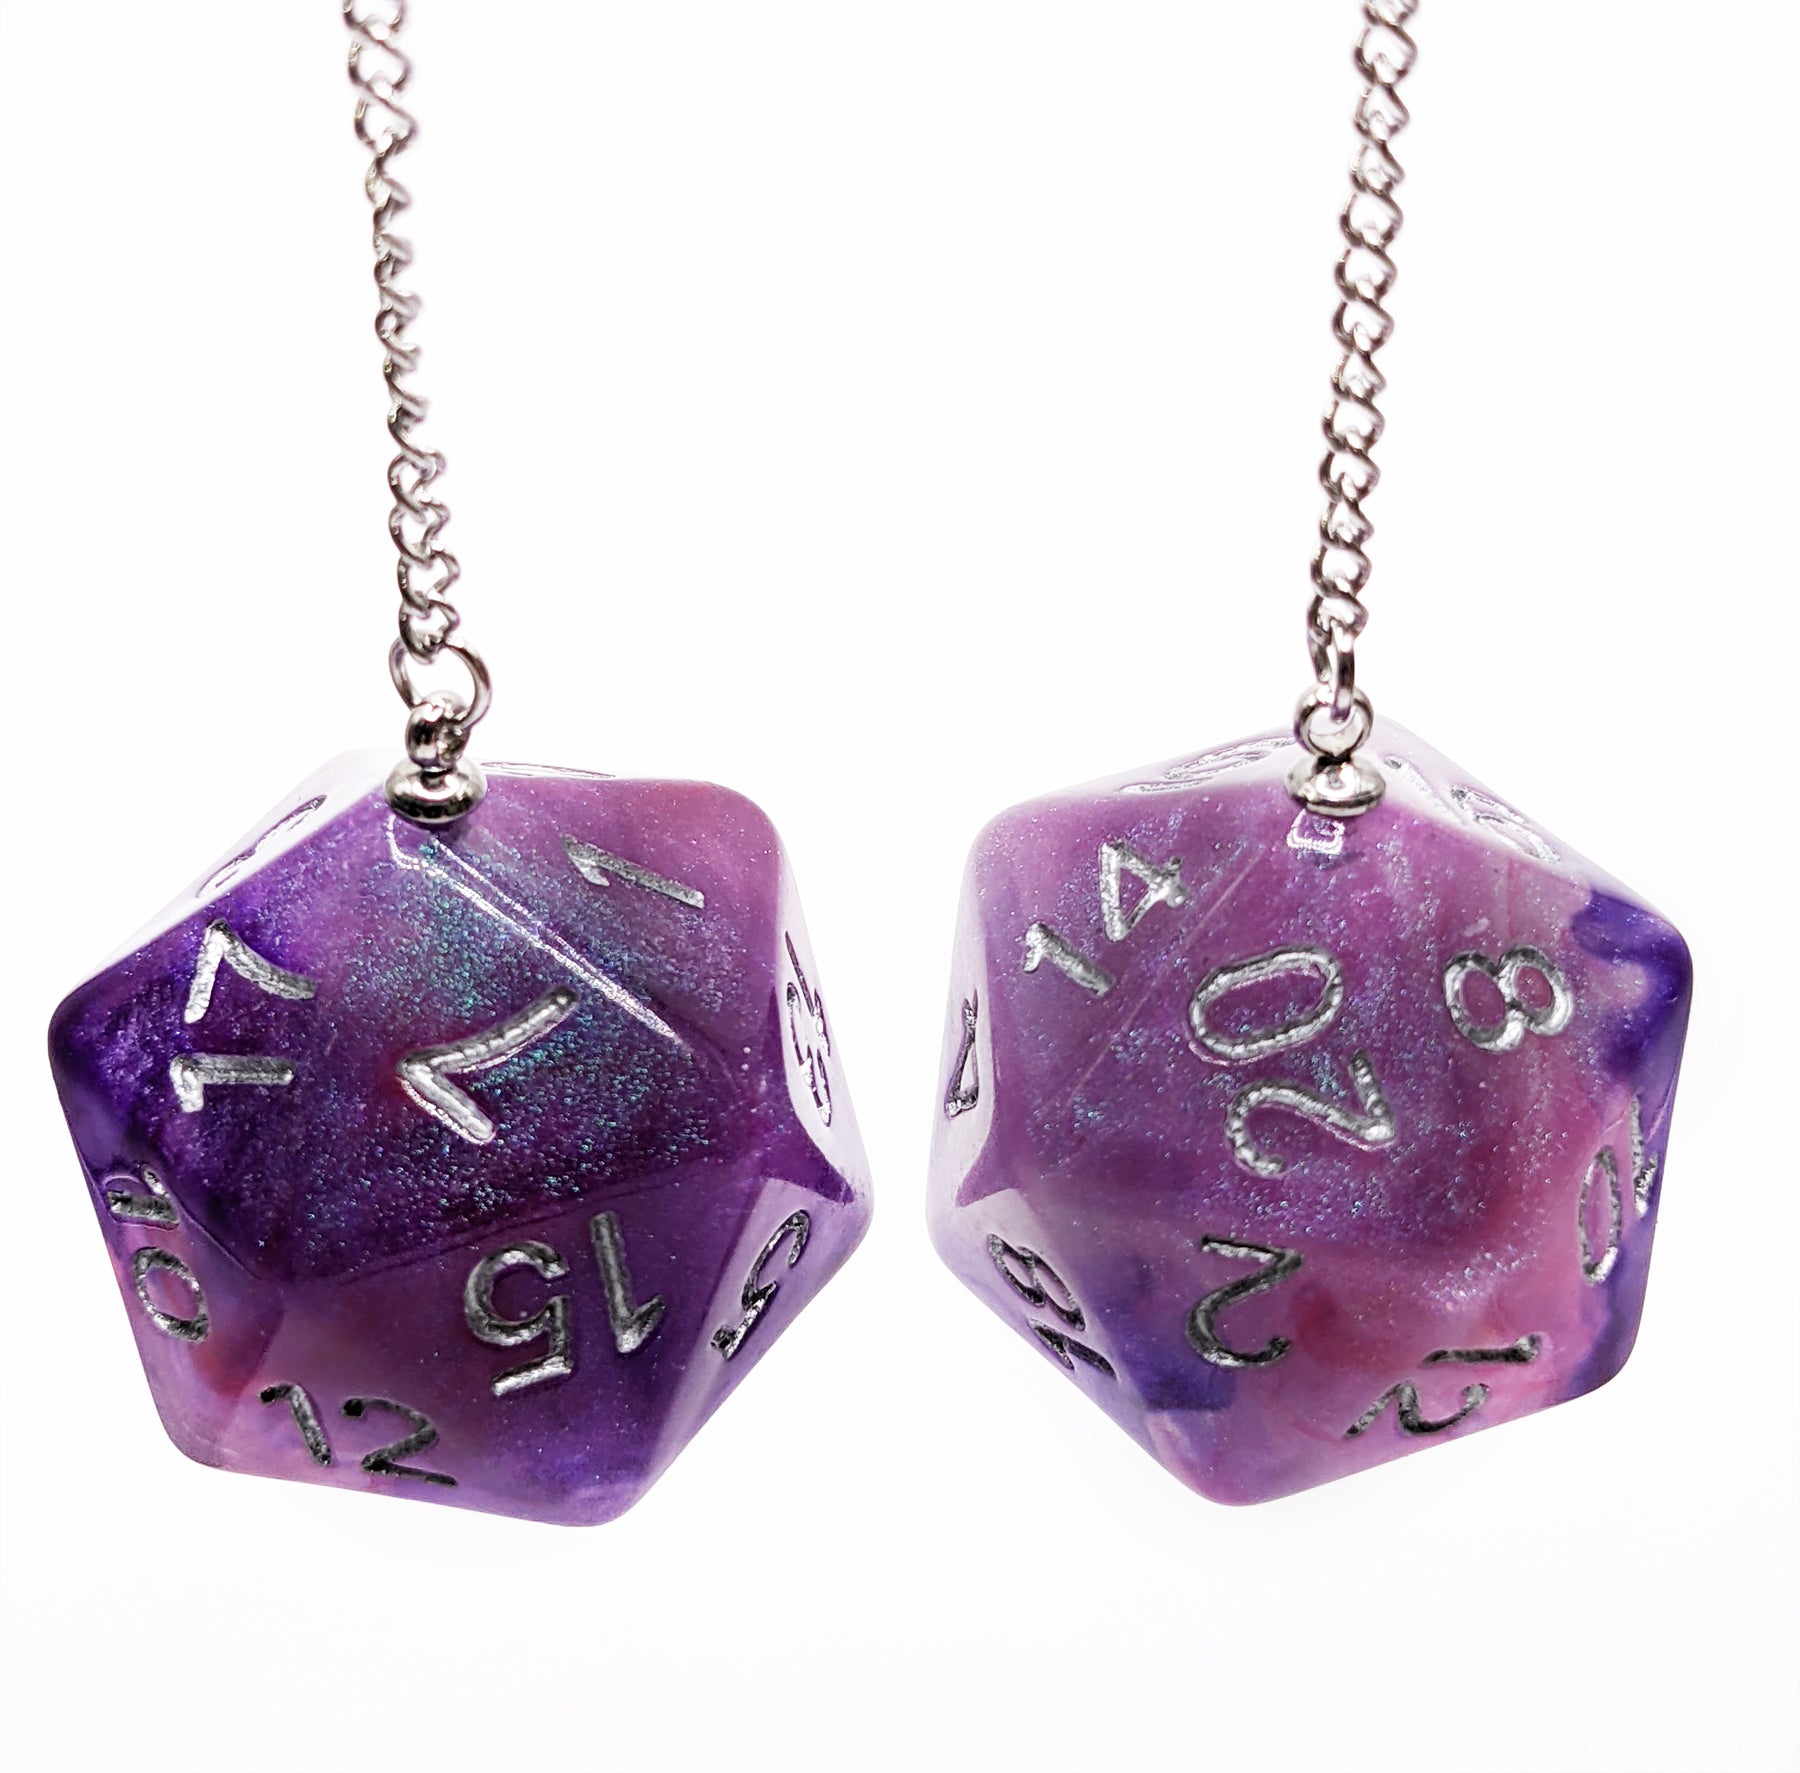 D20 Necklace With Silver Hue Chain (Rainbow D20)